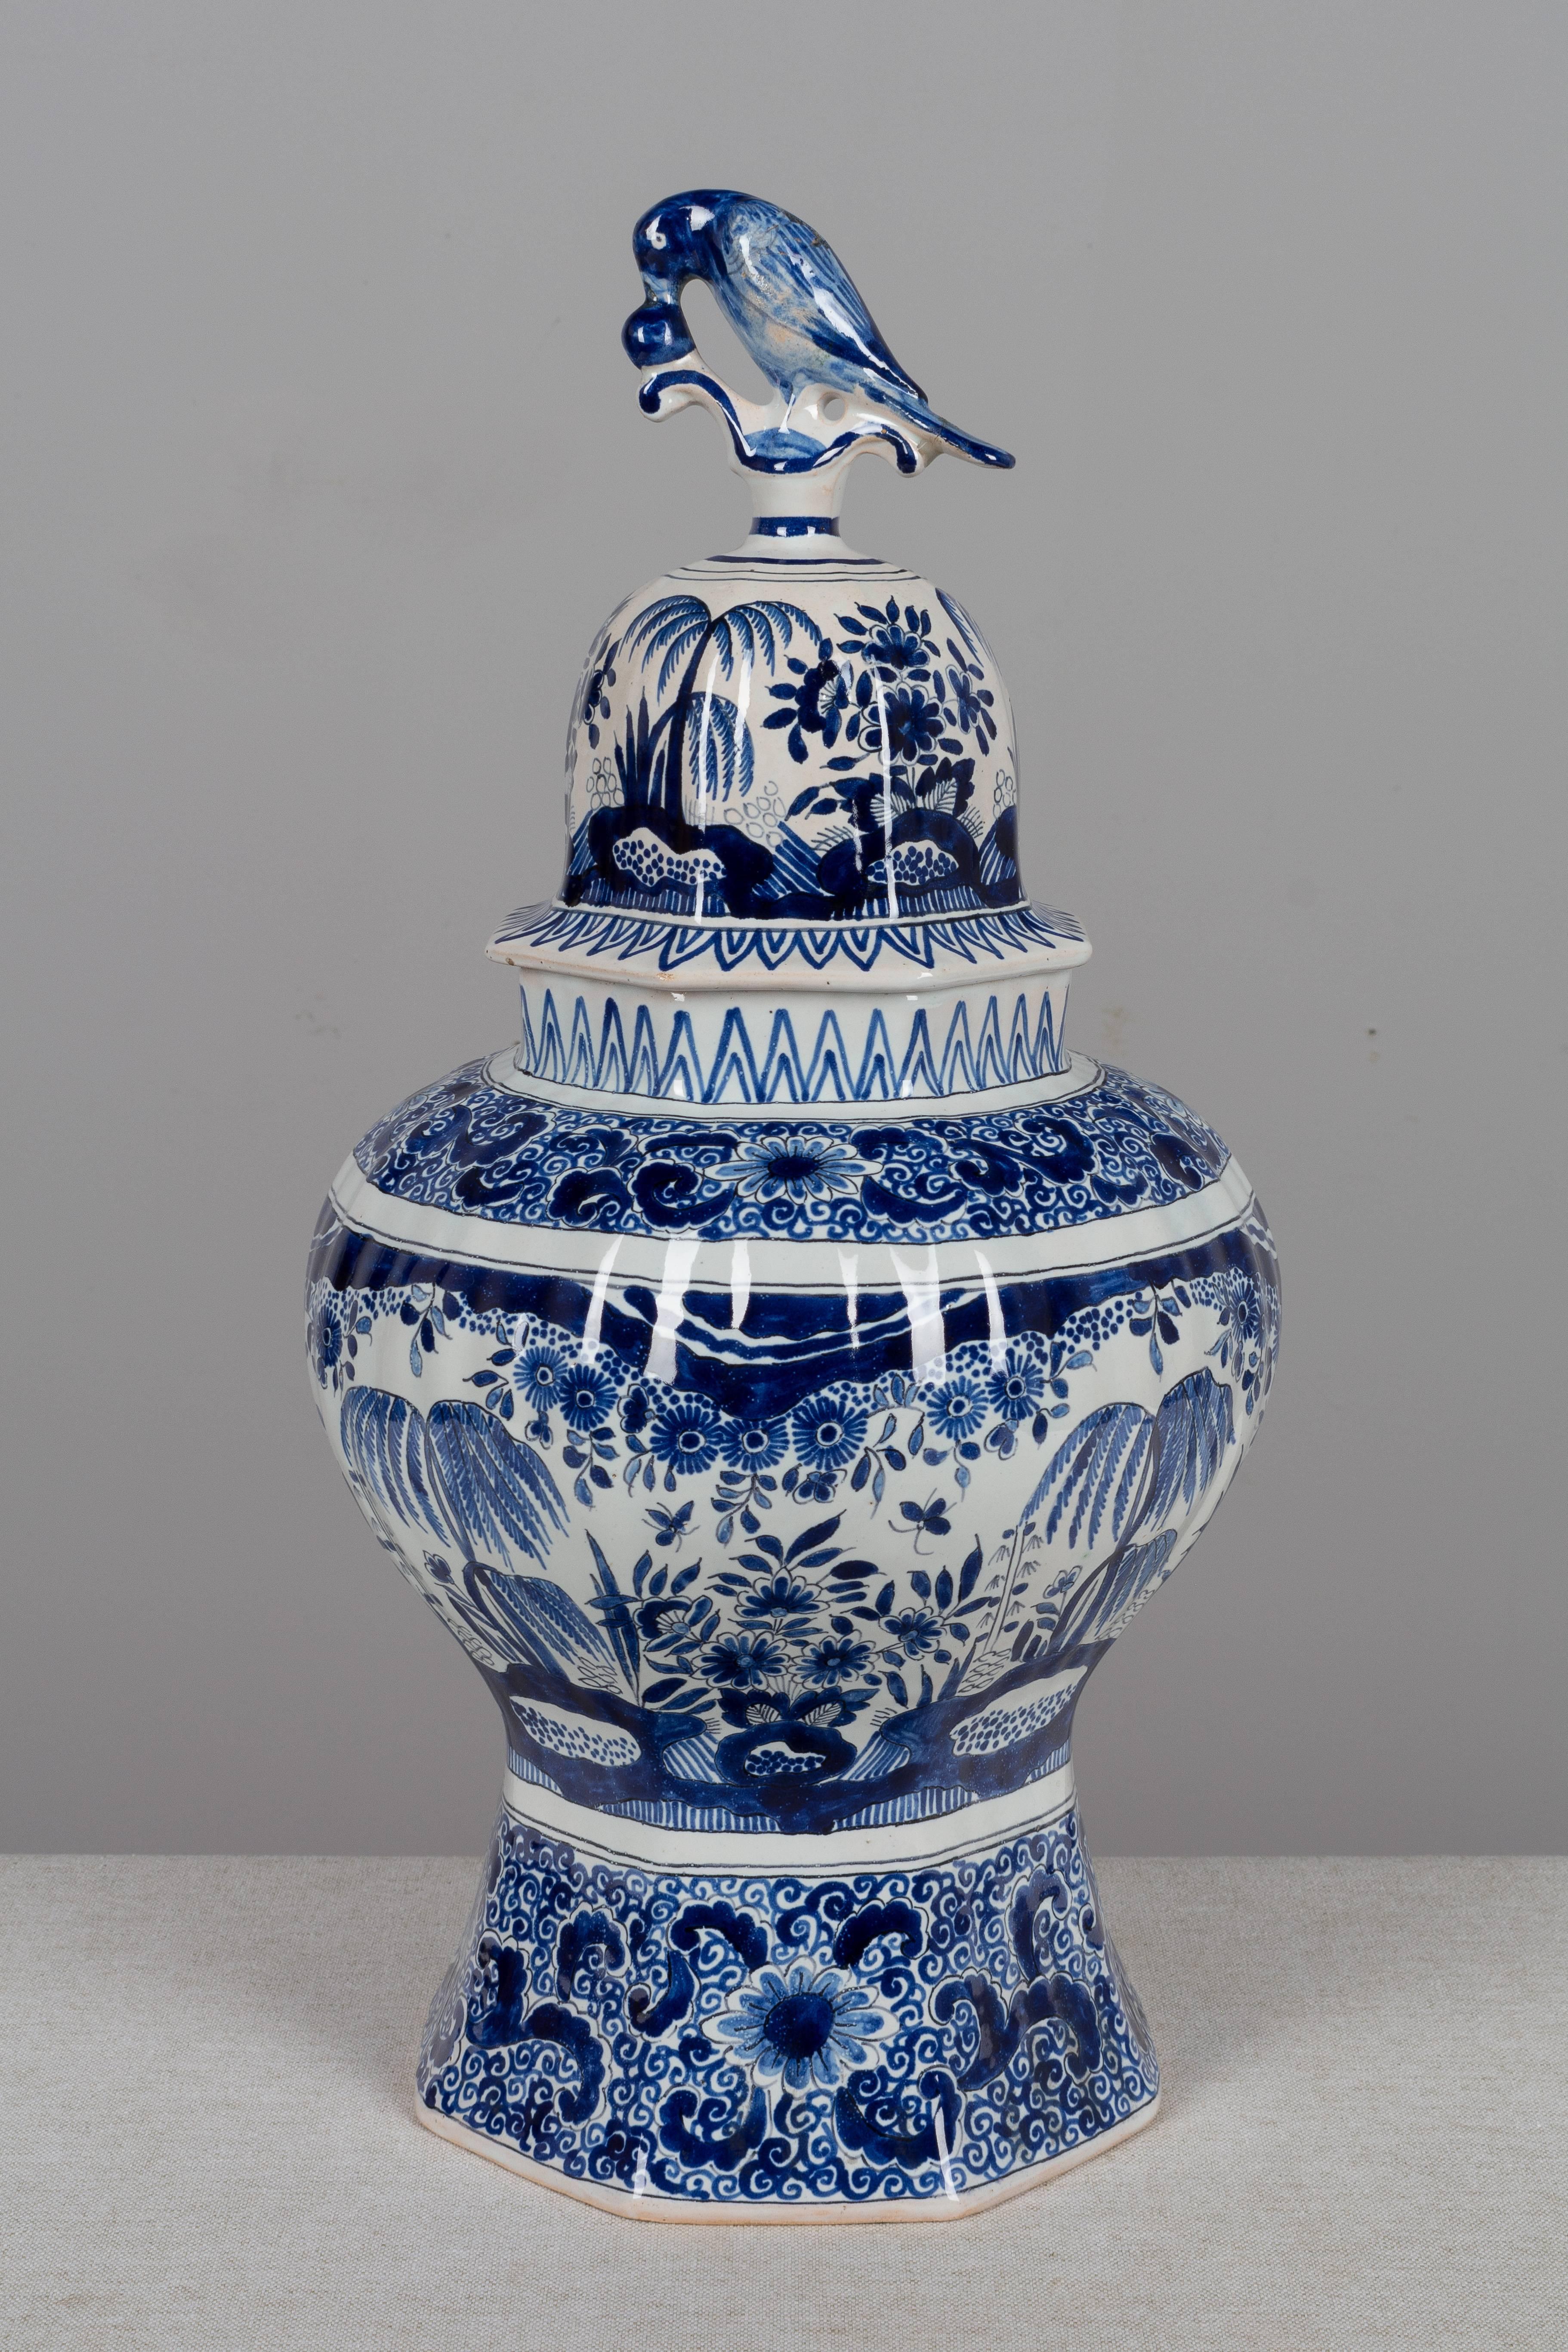 A large 19th century delft faience octagonal ginger jar with hand-painted blue floral decoration in the Asian manner. Domed lid with a bird perched on top. Small flaw in glazing of the top of the bird and repair to the tail. Please refer to photos